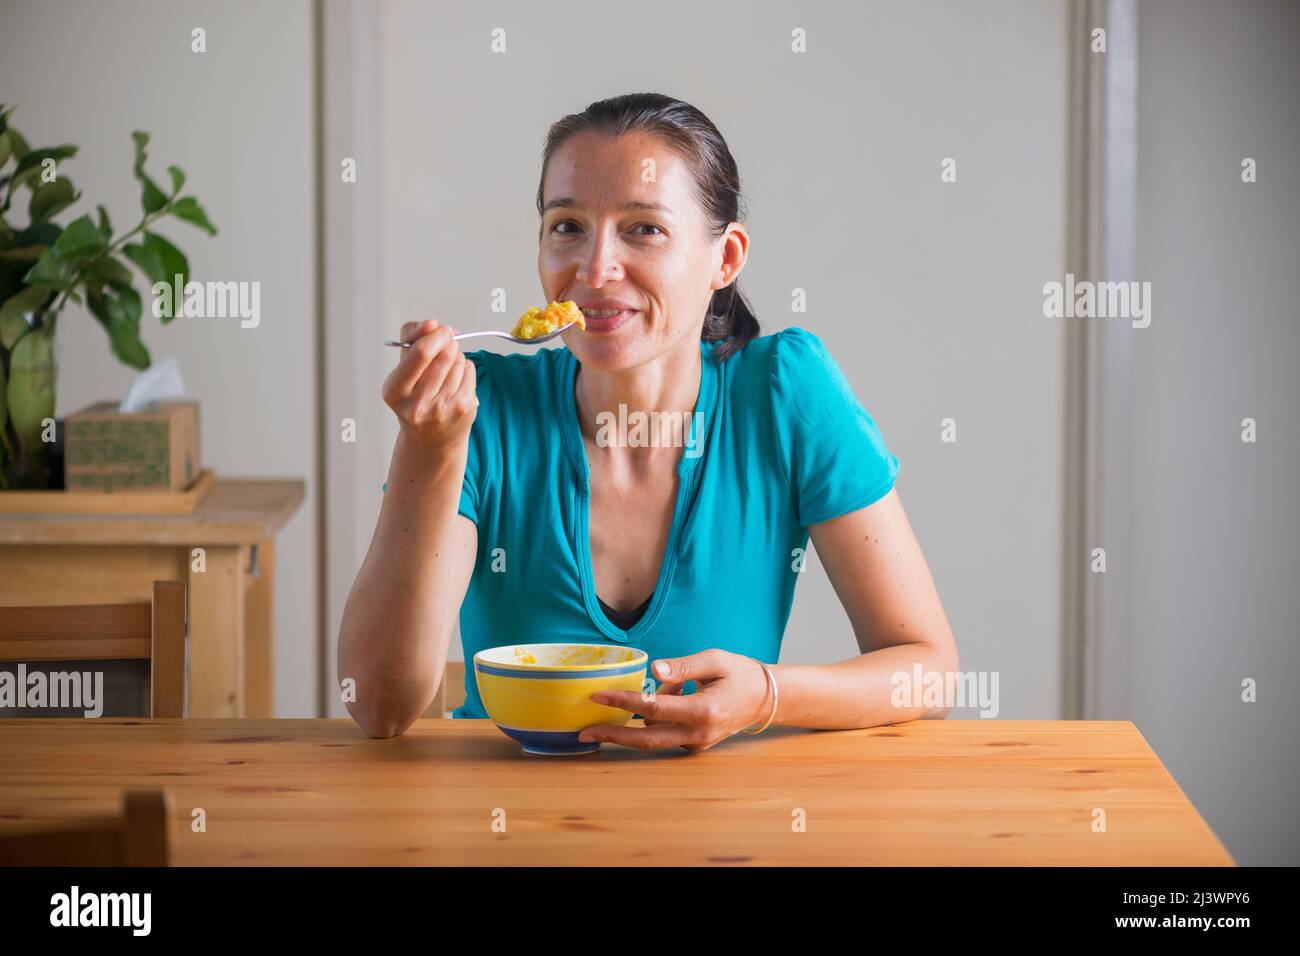 Smiling woman eating kitchari for a breakfast. Indian cuisine. Lifestyle portrait. Stock Photo